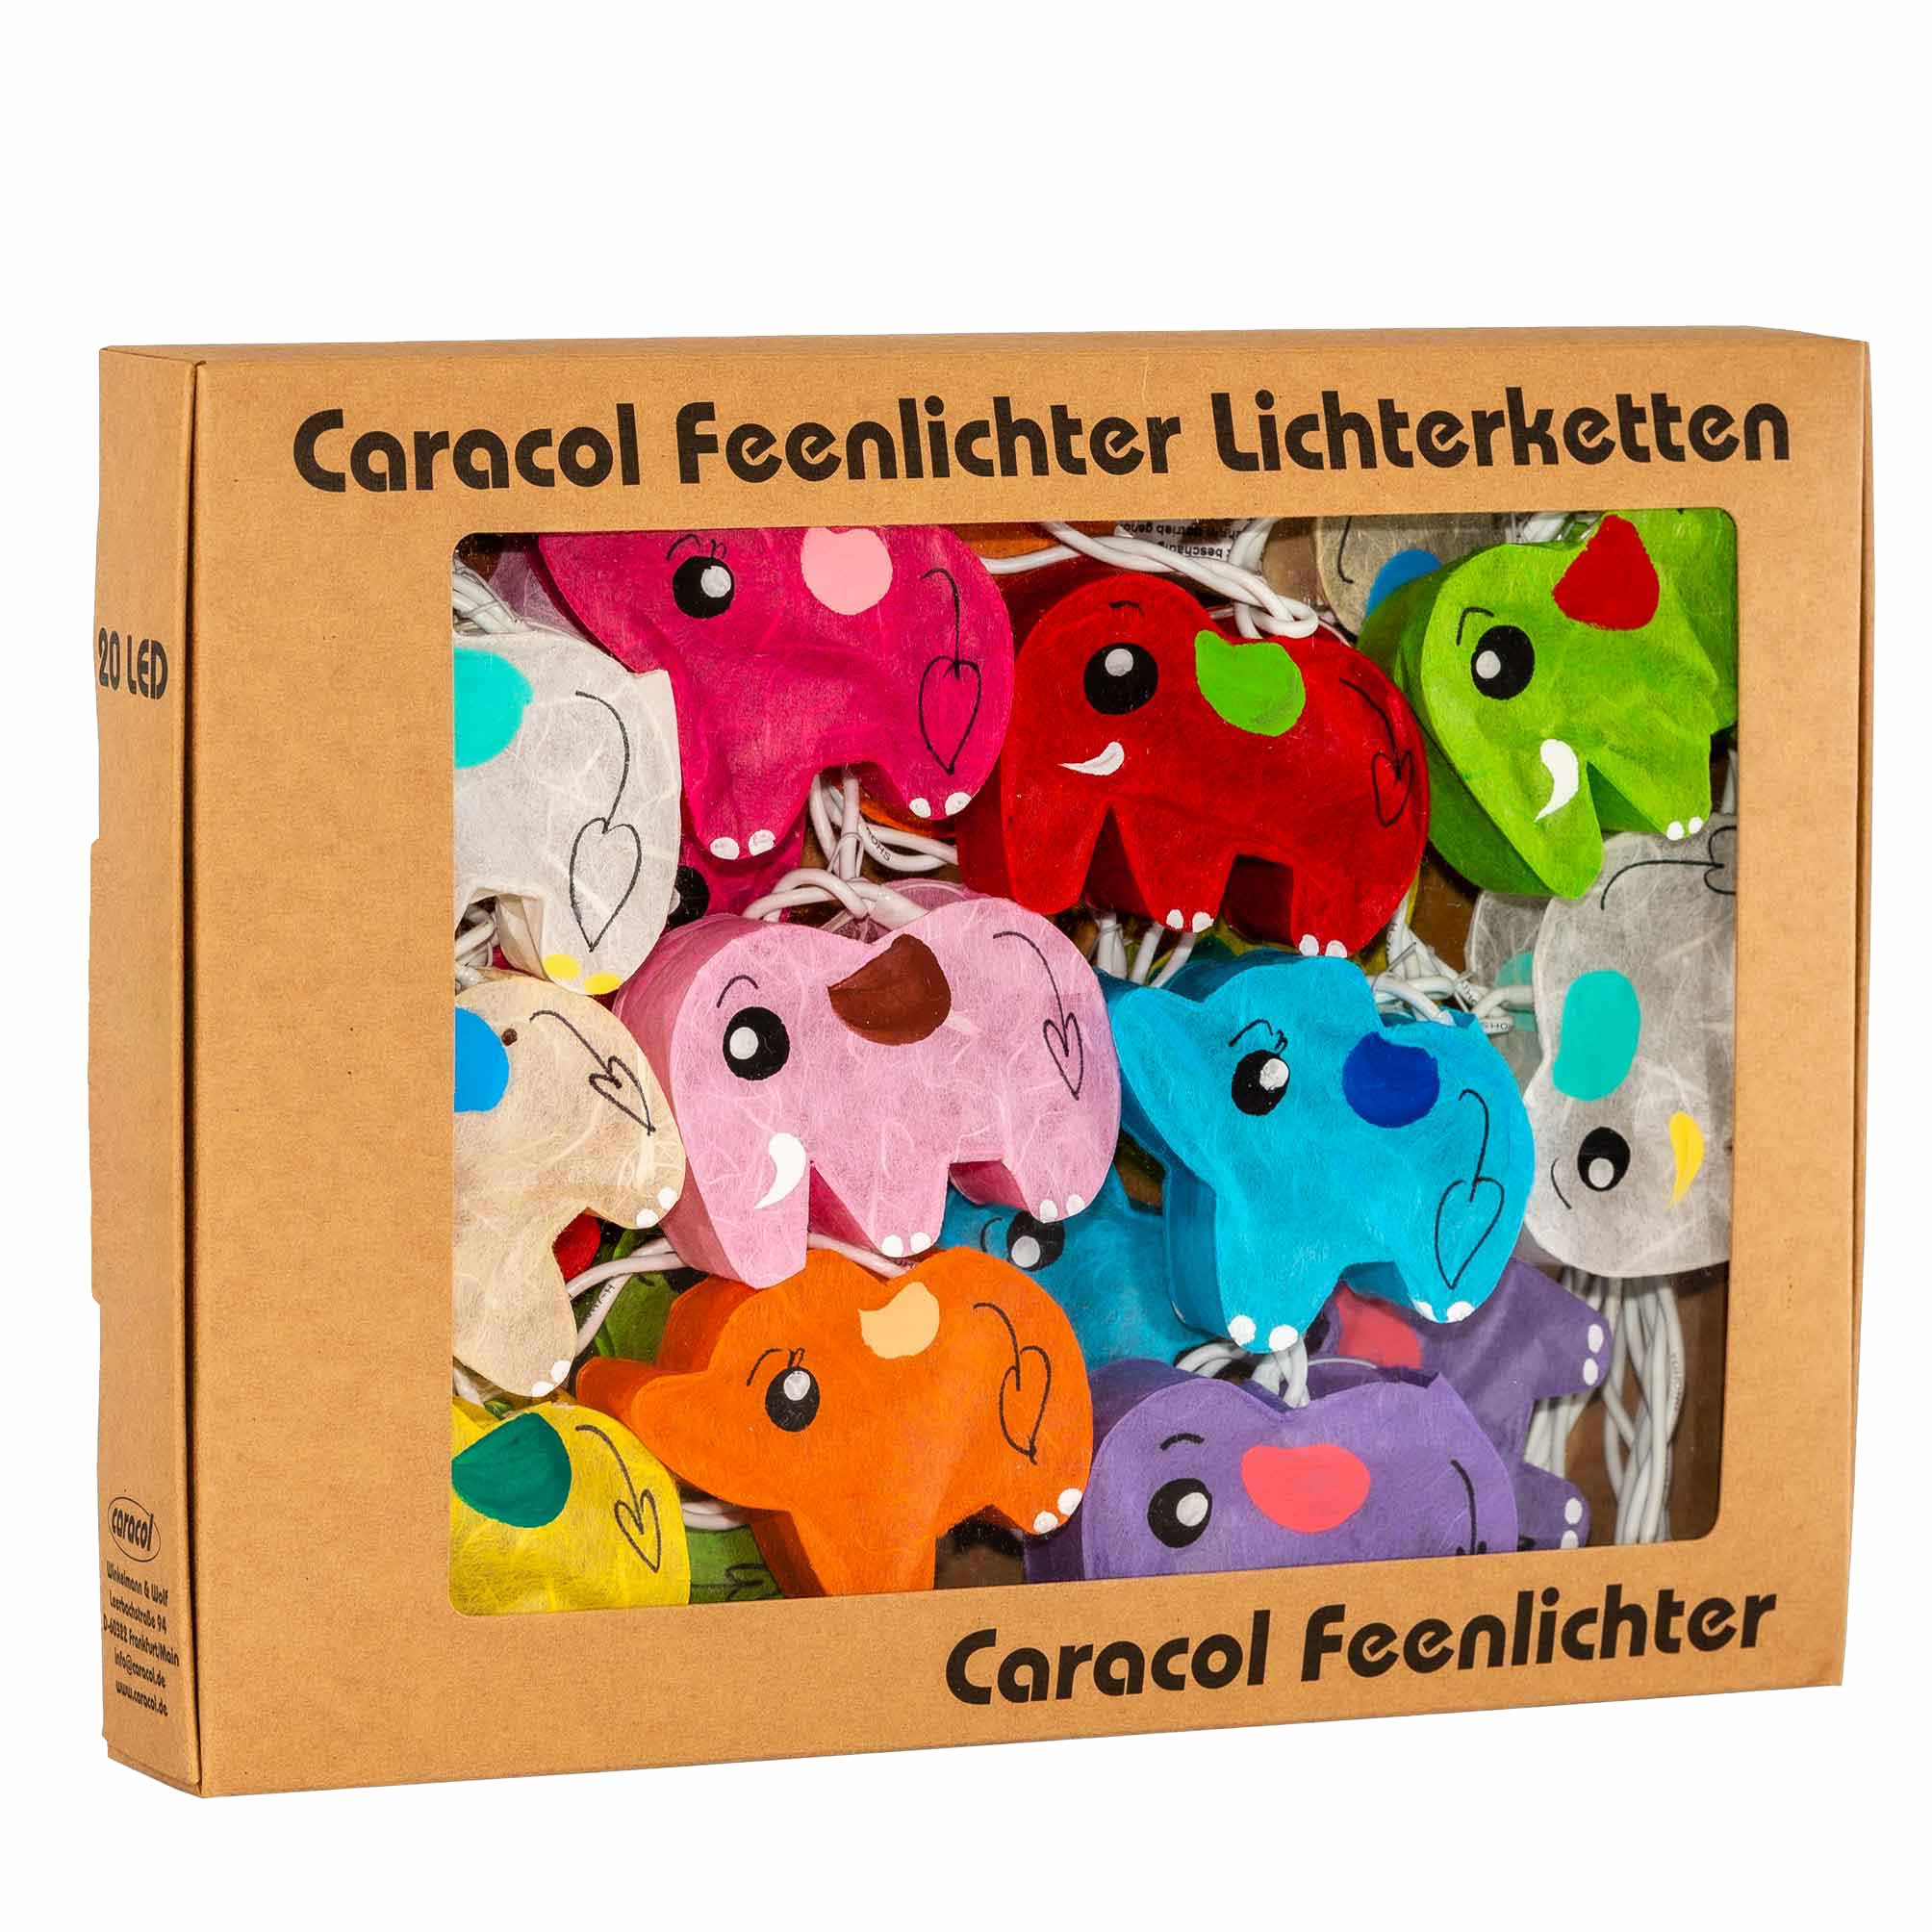 Caracol-Feenlichter-LED-Elephanten-Rainbow-20L-Verpackung